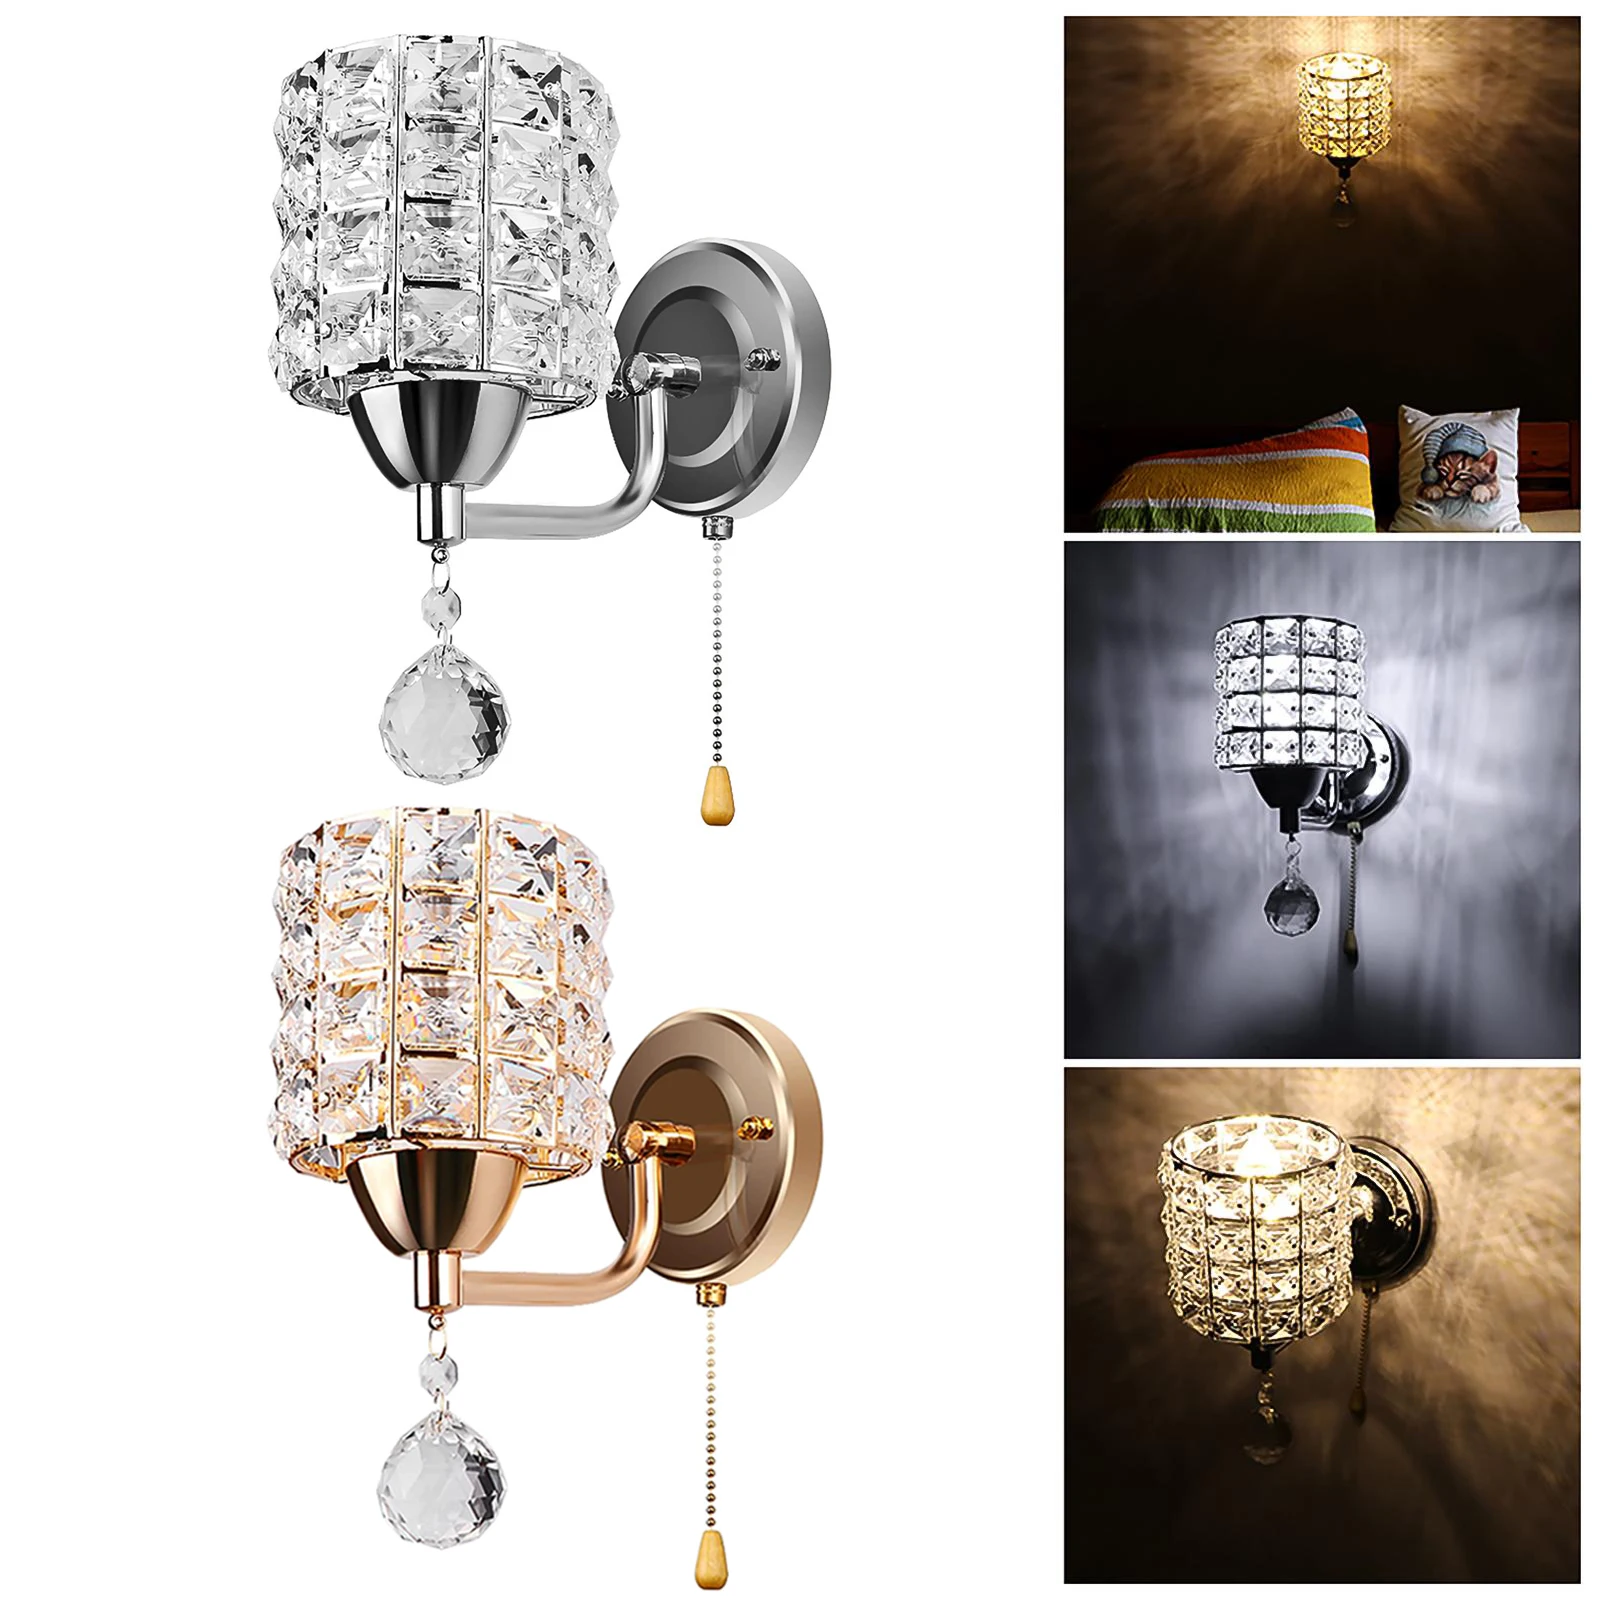 Modern Decorative Crystal Wall Lights, Bedside Wall Lamp Sconce for DIY Home Decor with E26/E27 Socket, Bulb NOT Included